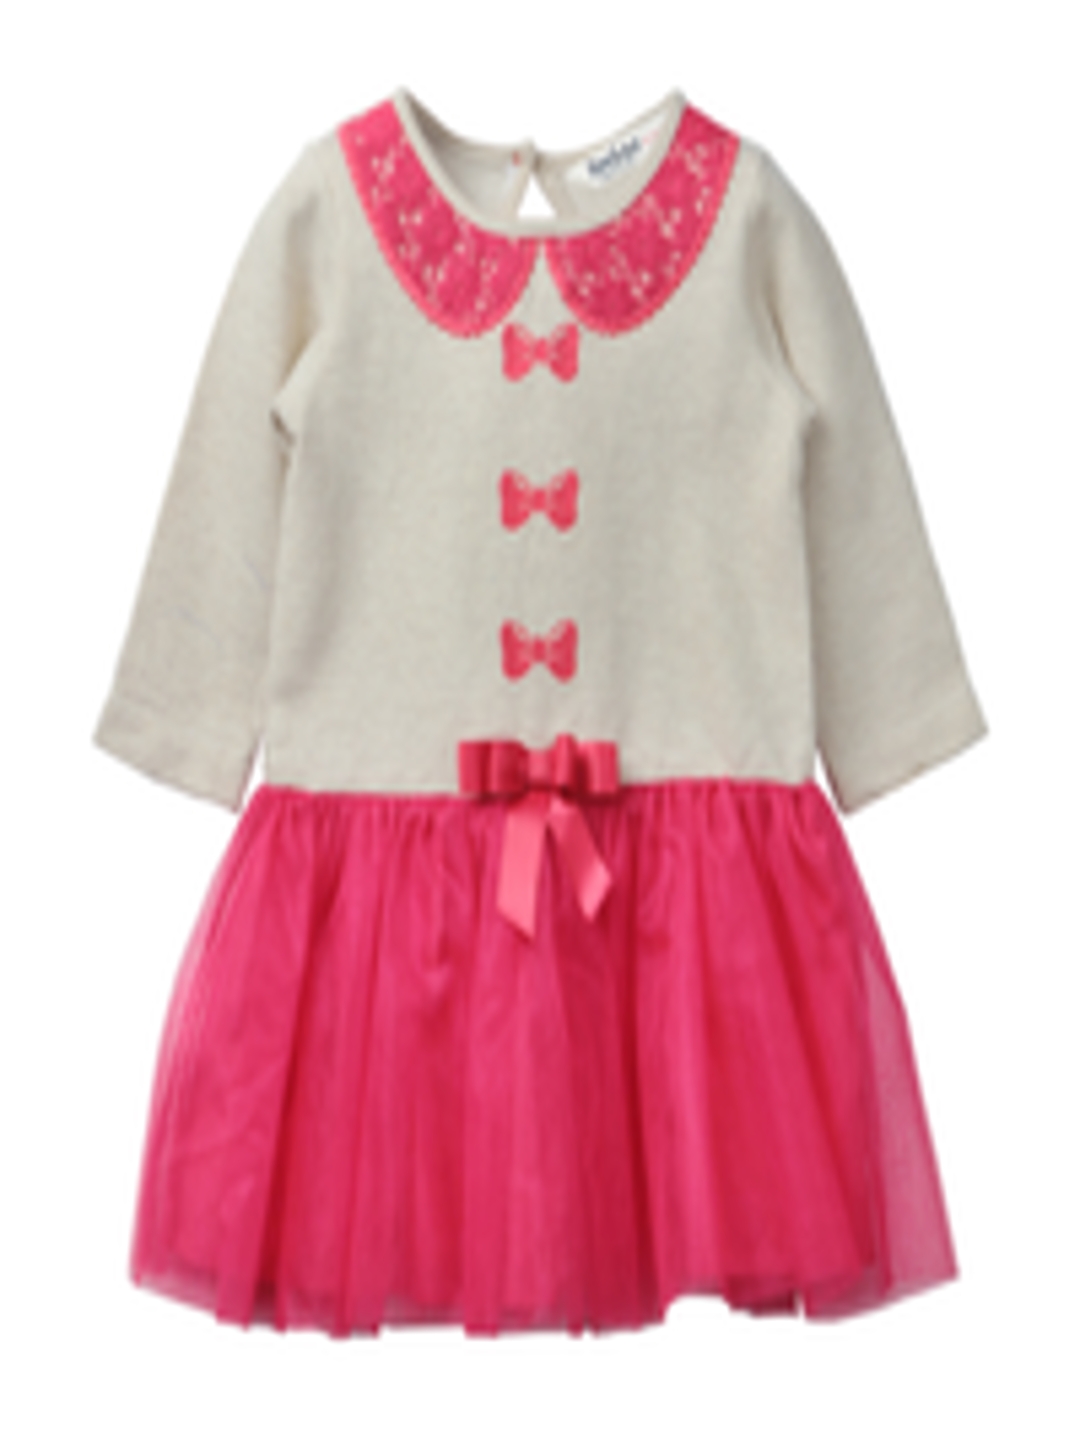 Buy Beebay Girls Off White & Pink Embroidered Drop Waist Dress